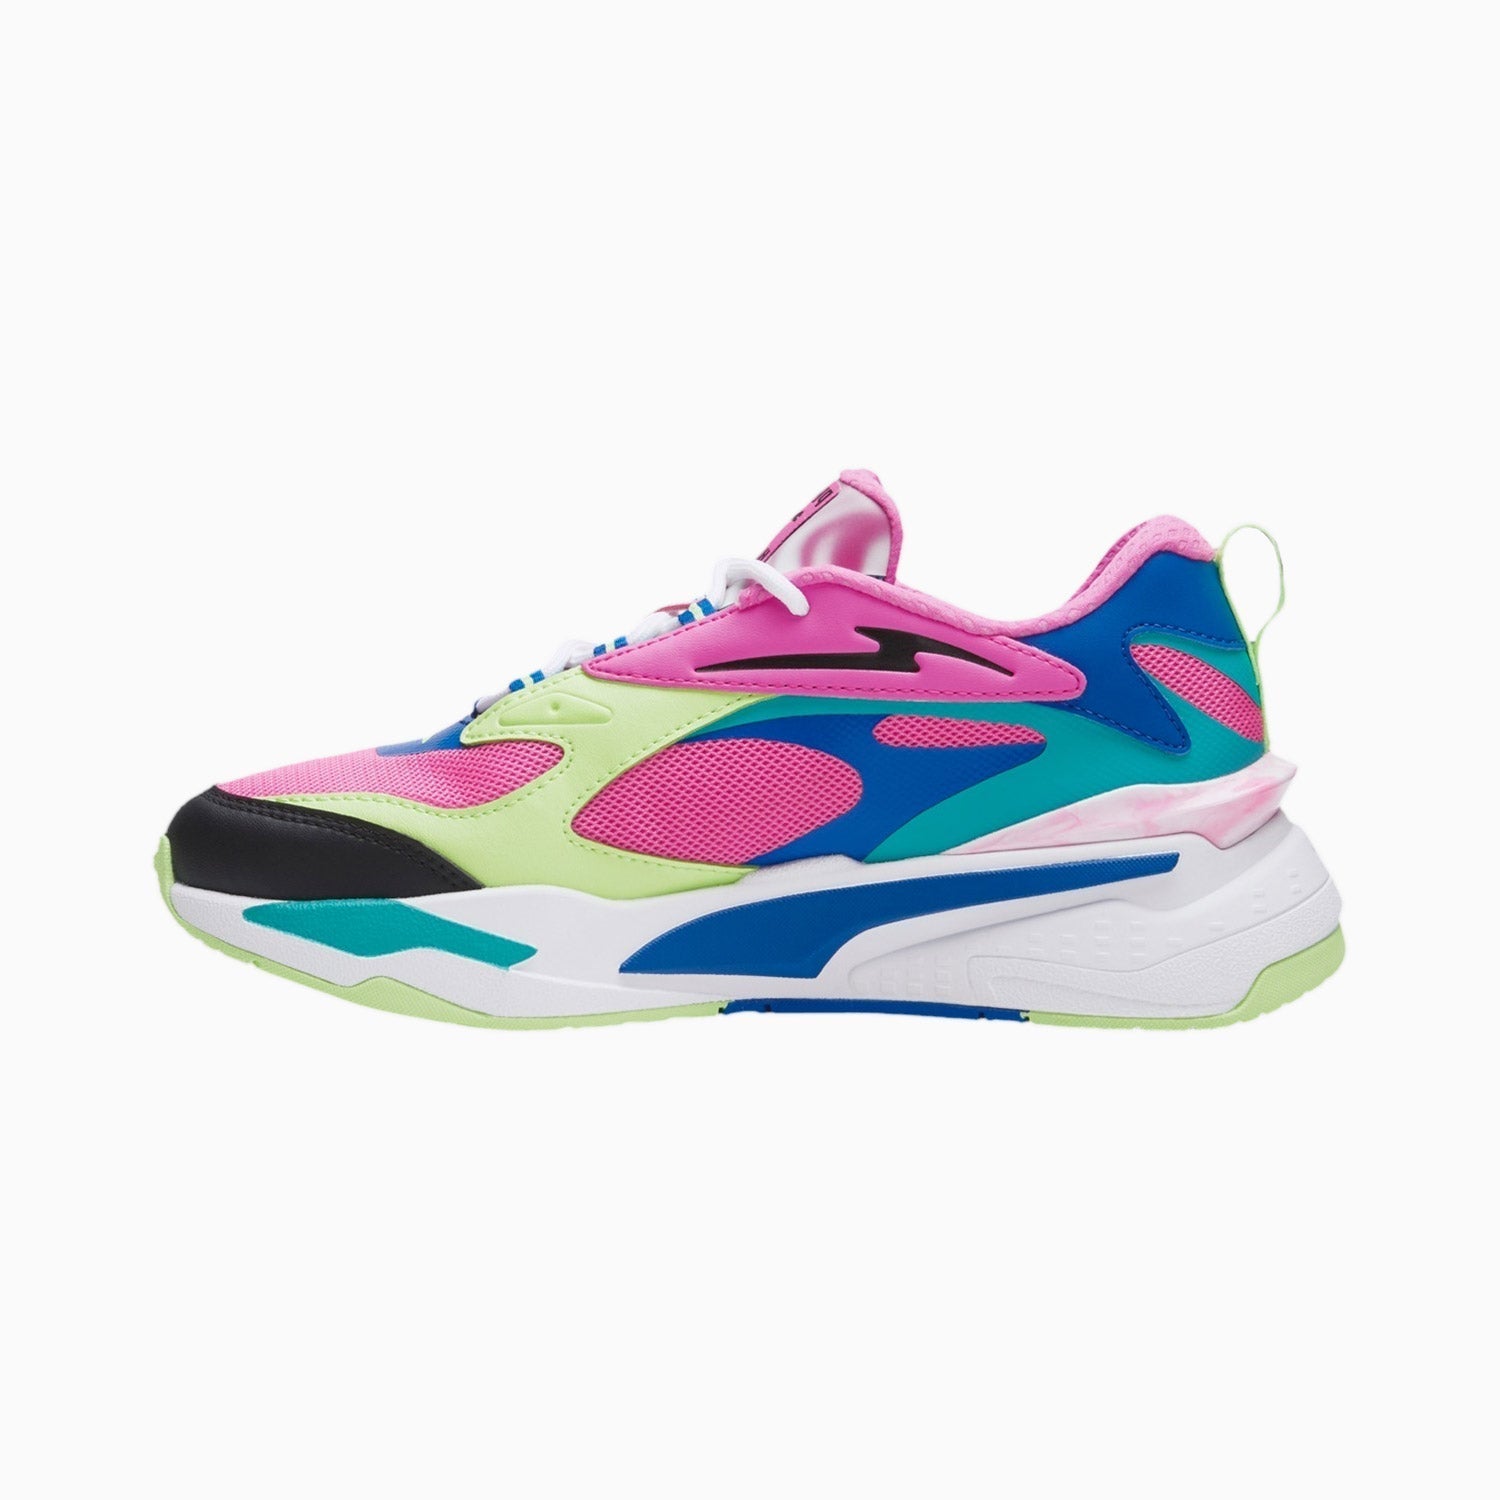 puma-womens-rs-fast-marble-sneakers-387045-01